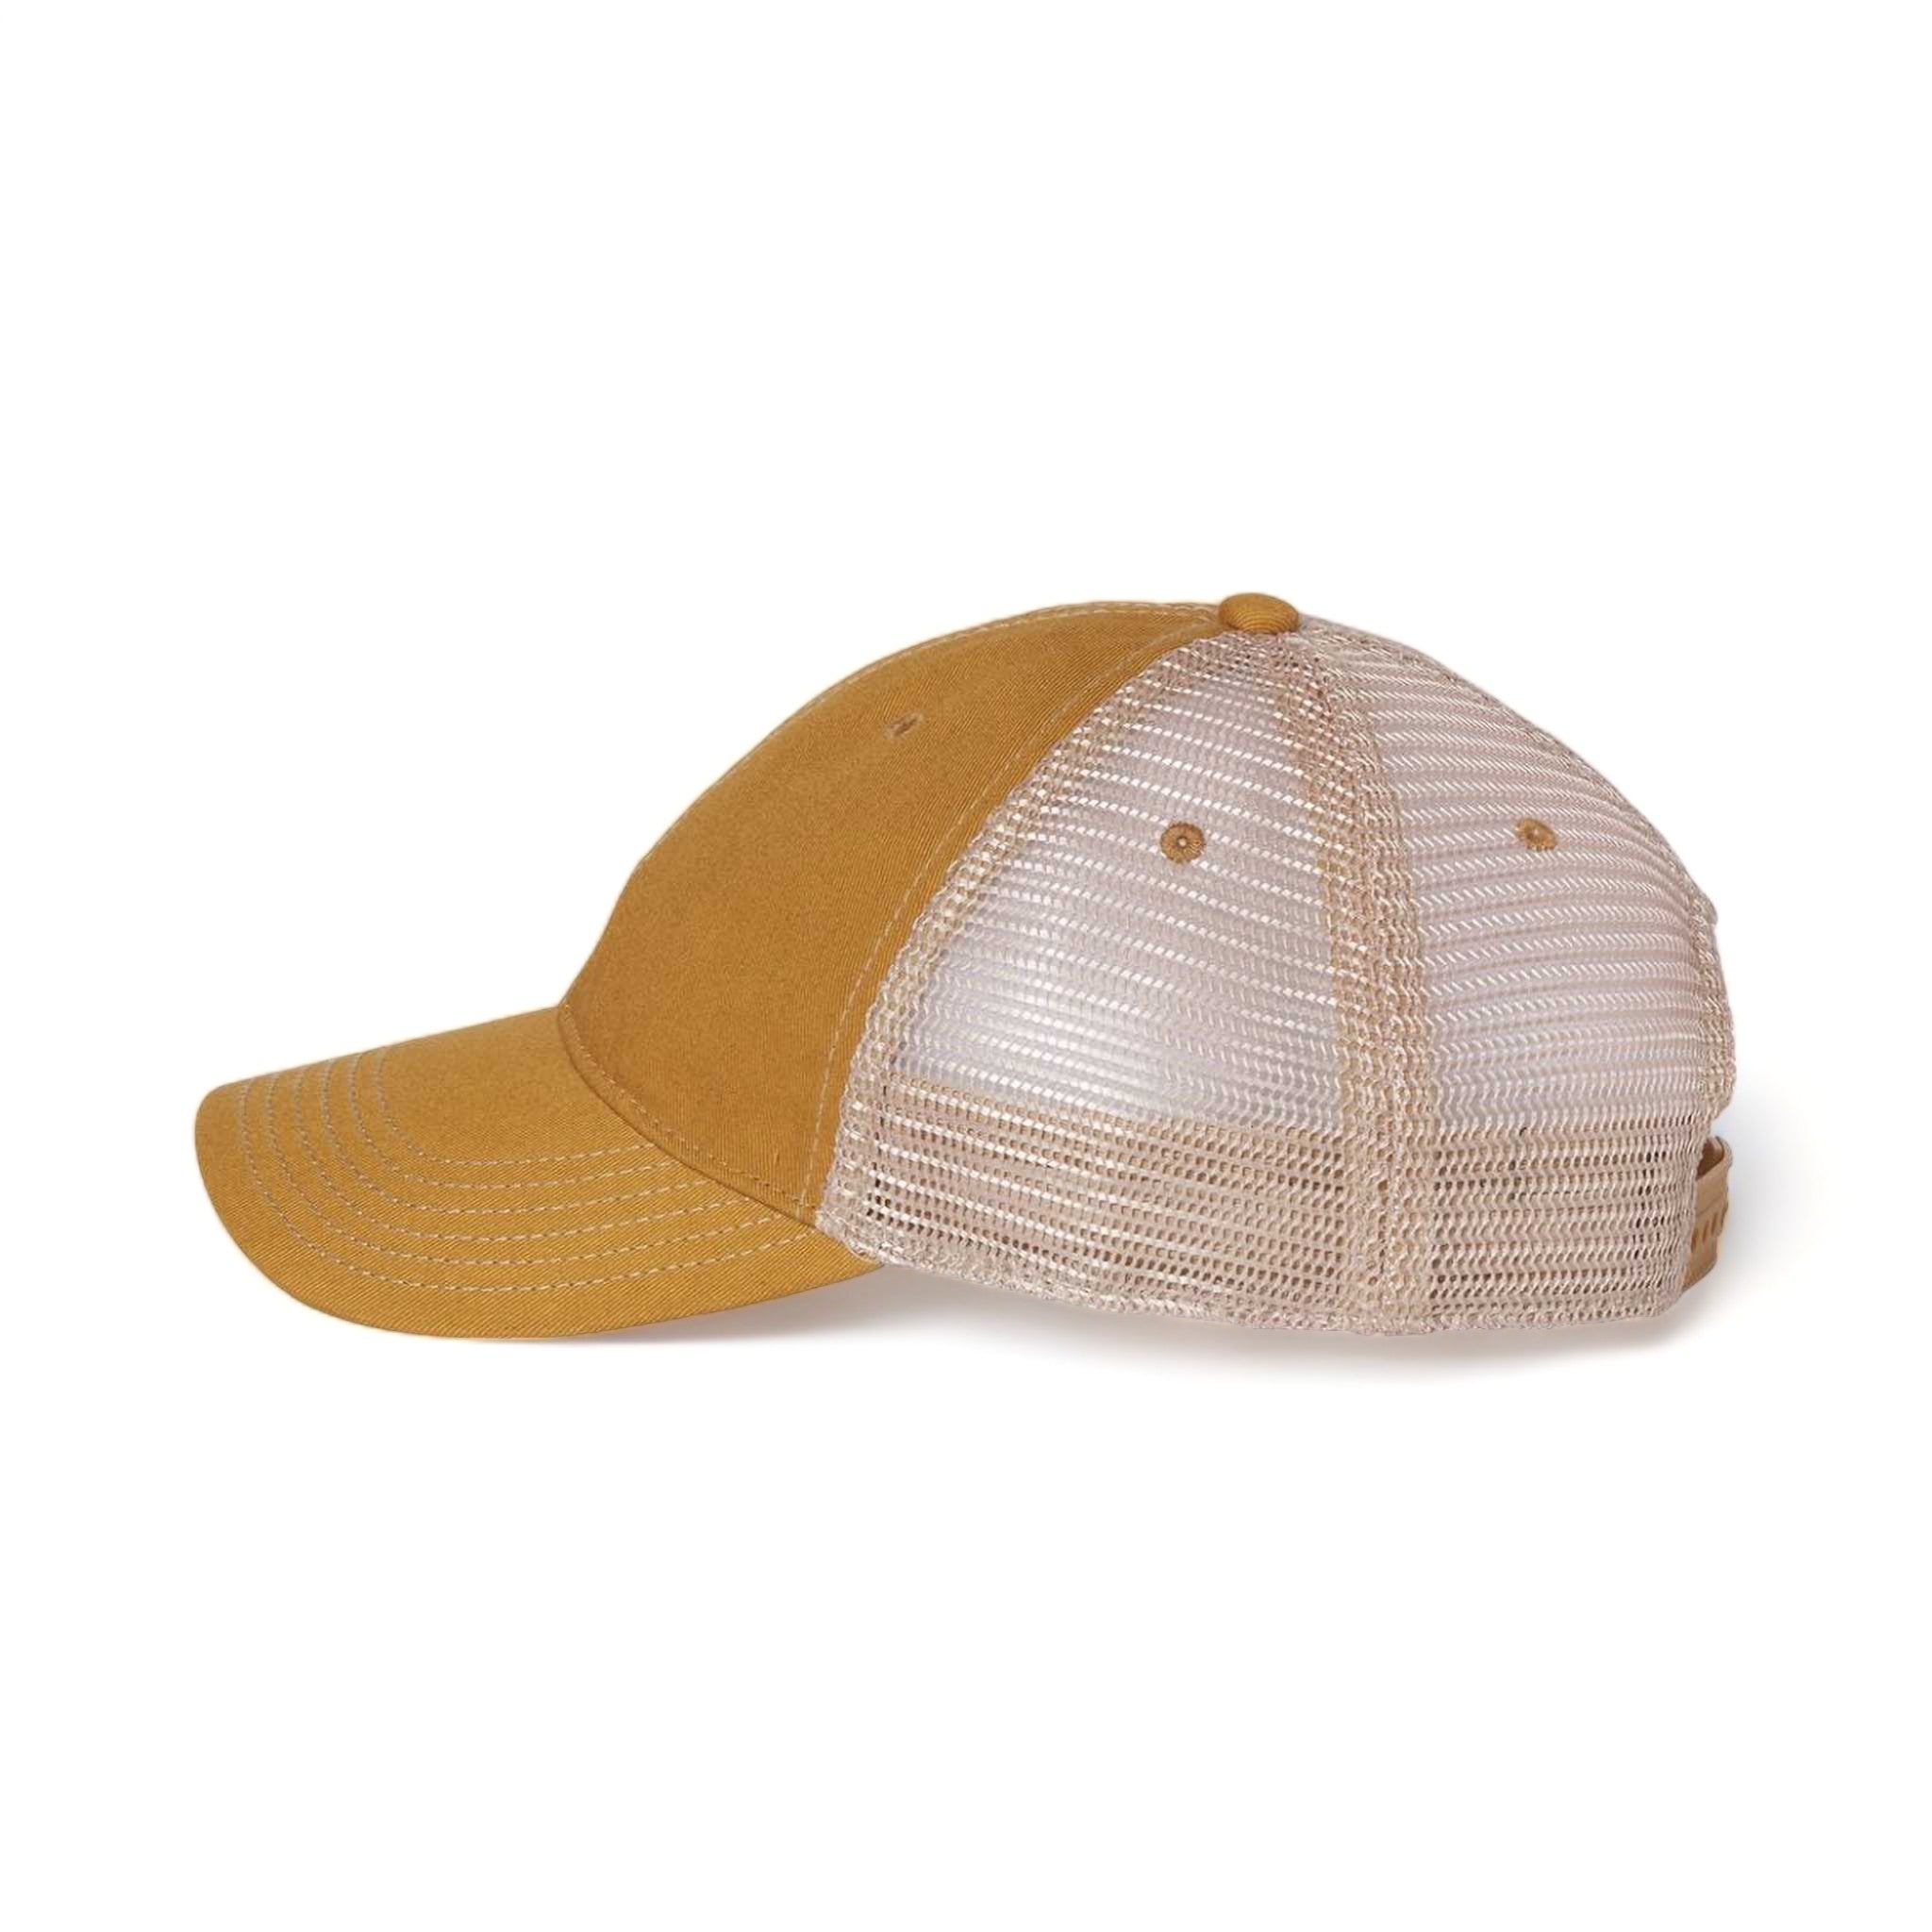 Side view of LEGACY OFA custom hat in yellow and khaki